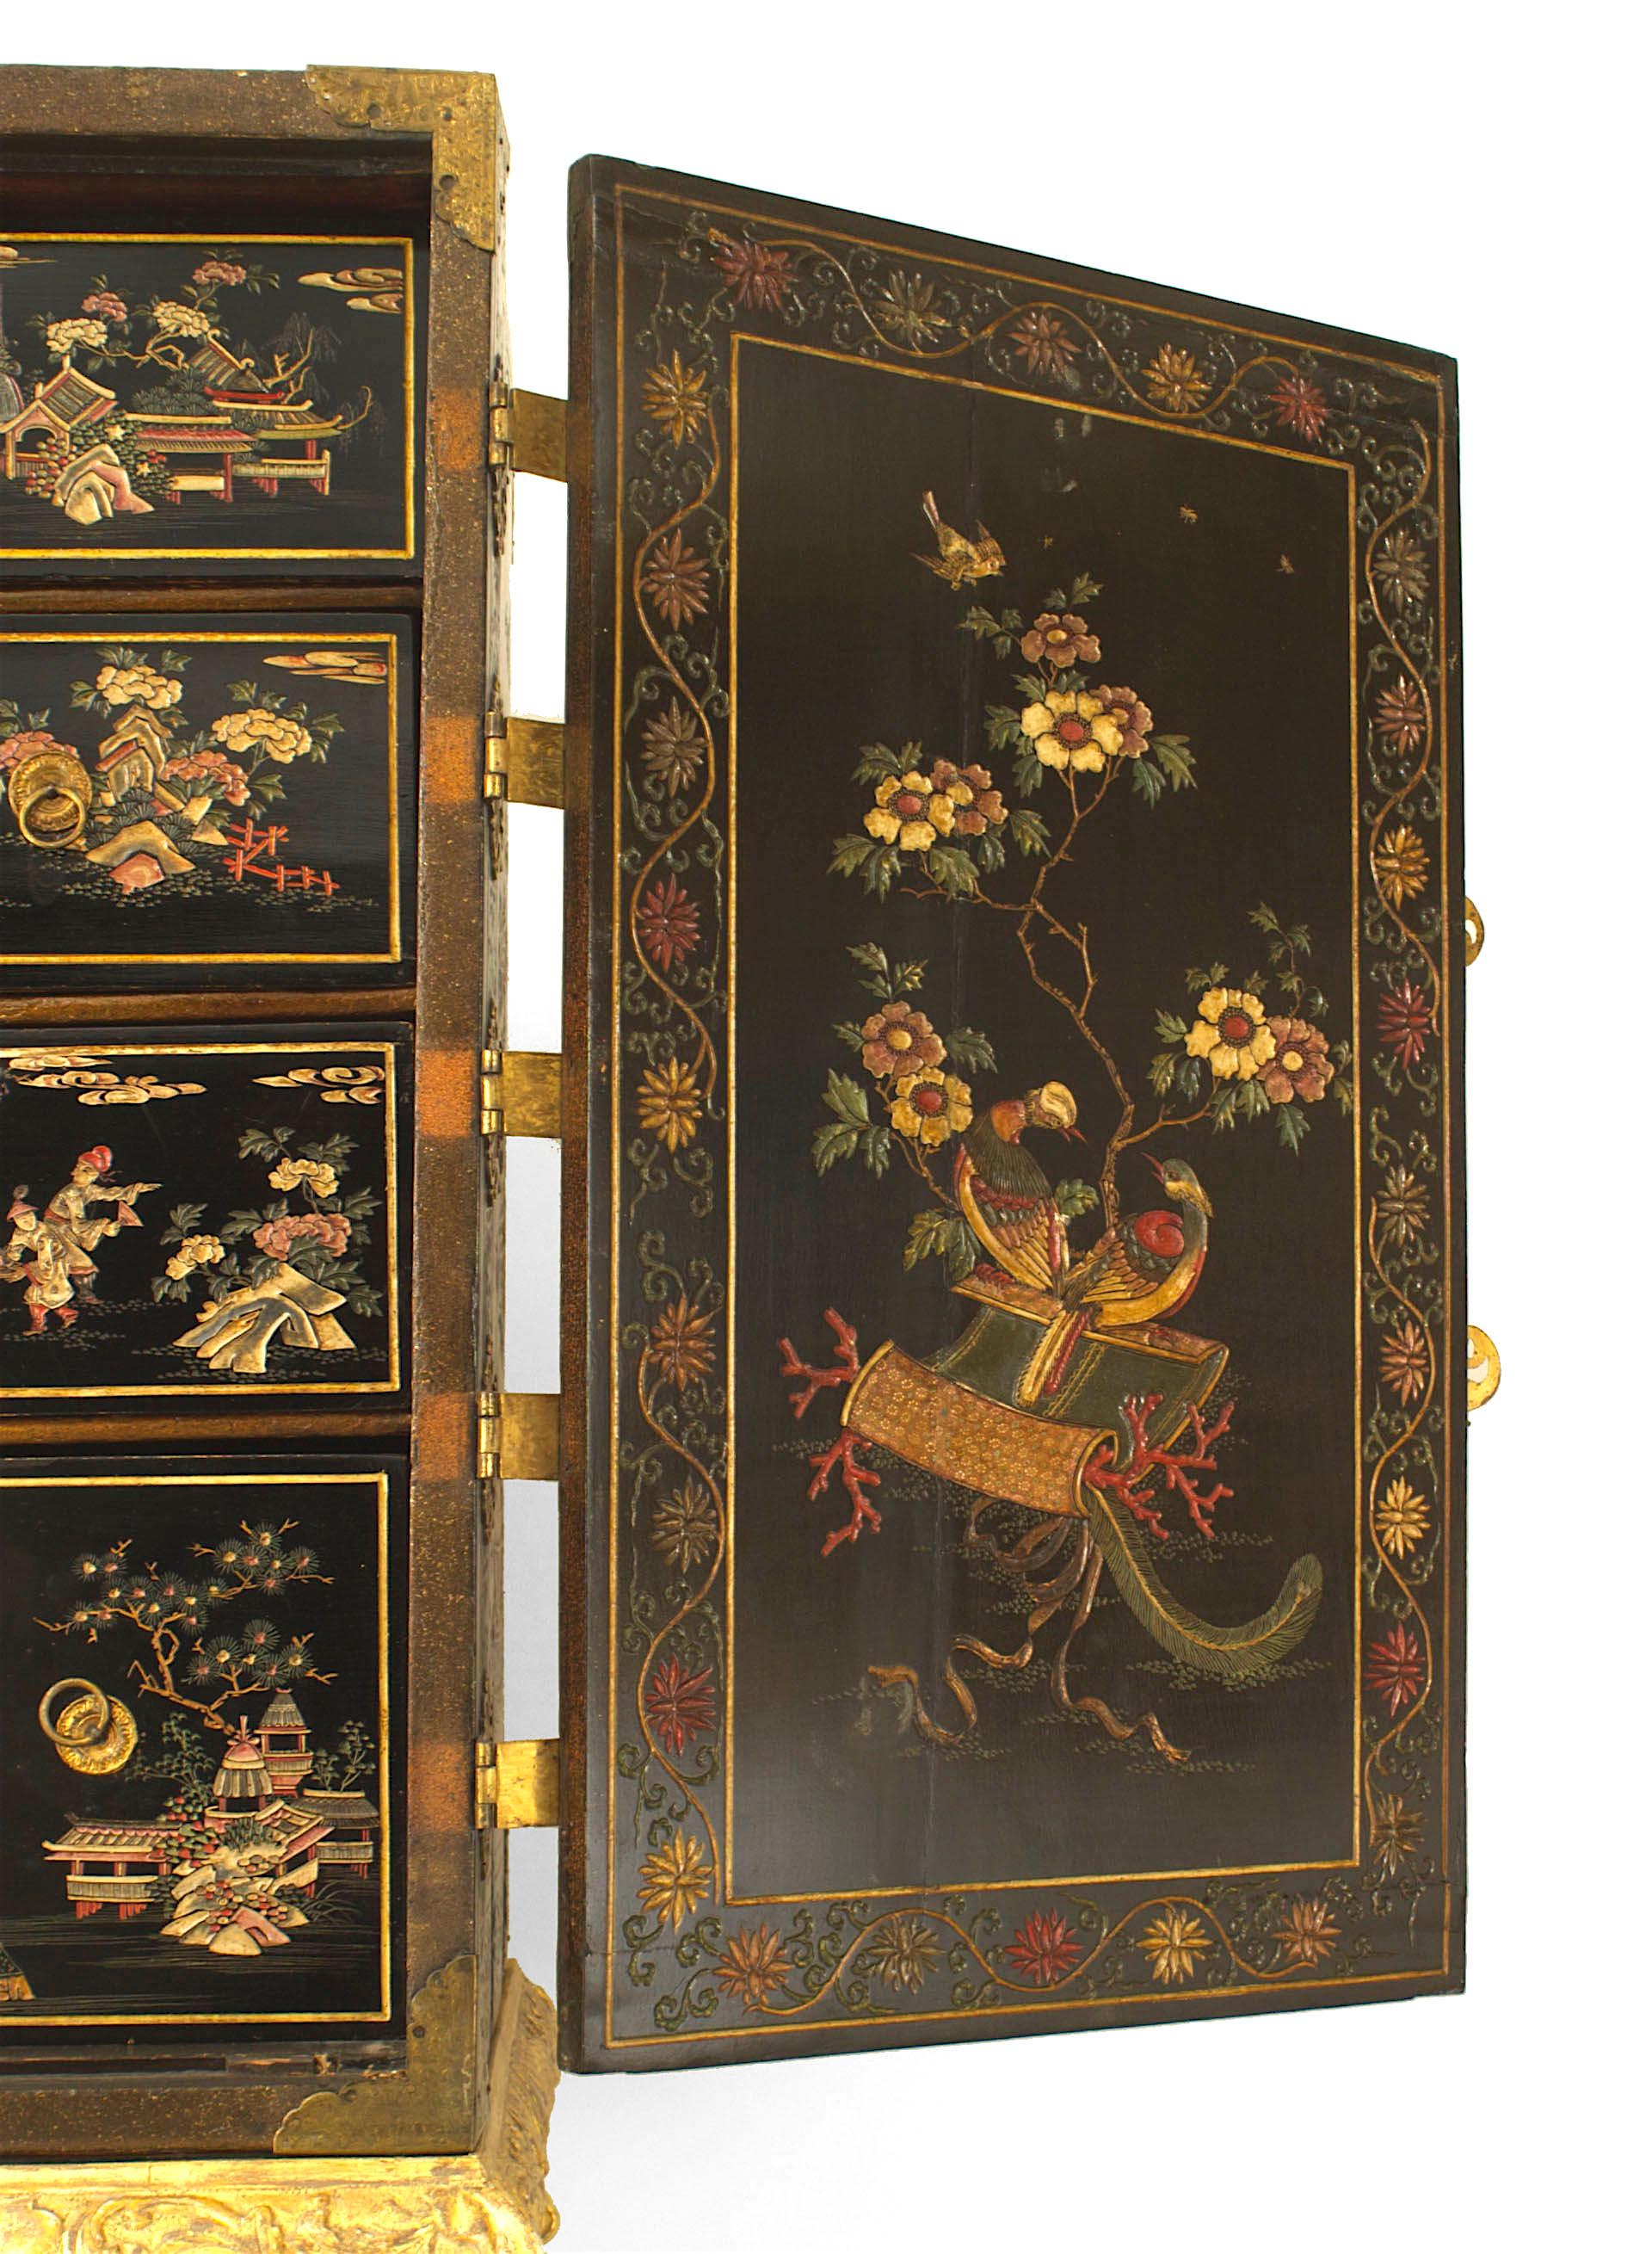 Giltwood 17th C. Chinese Coromandel Cabinet on a Charles II Gilt-wood Stand